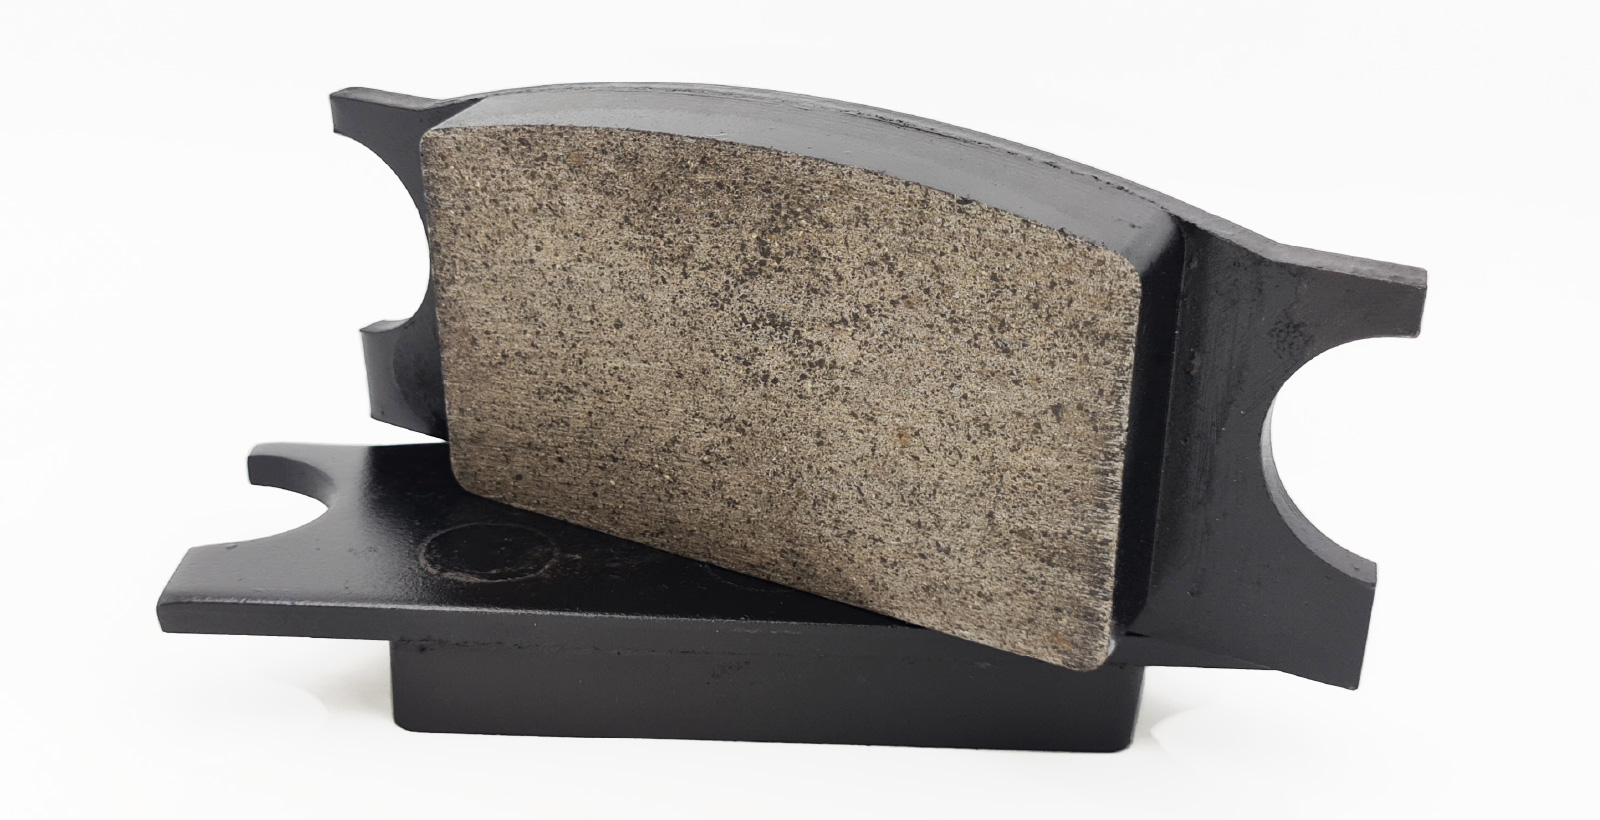 Commercial Brake Pads for Food and Dairy Industry